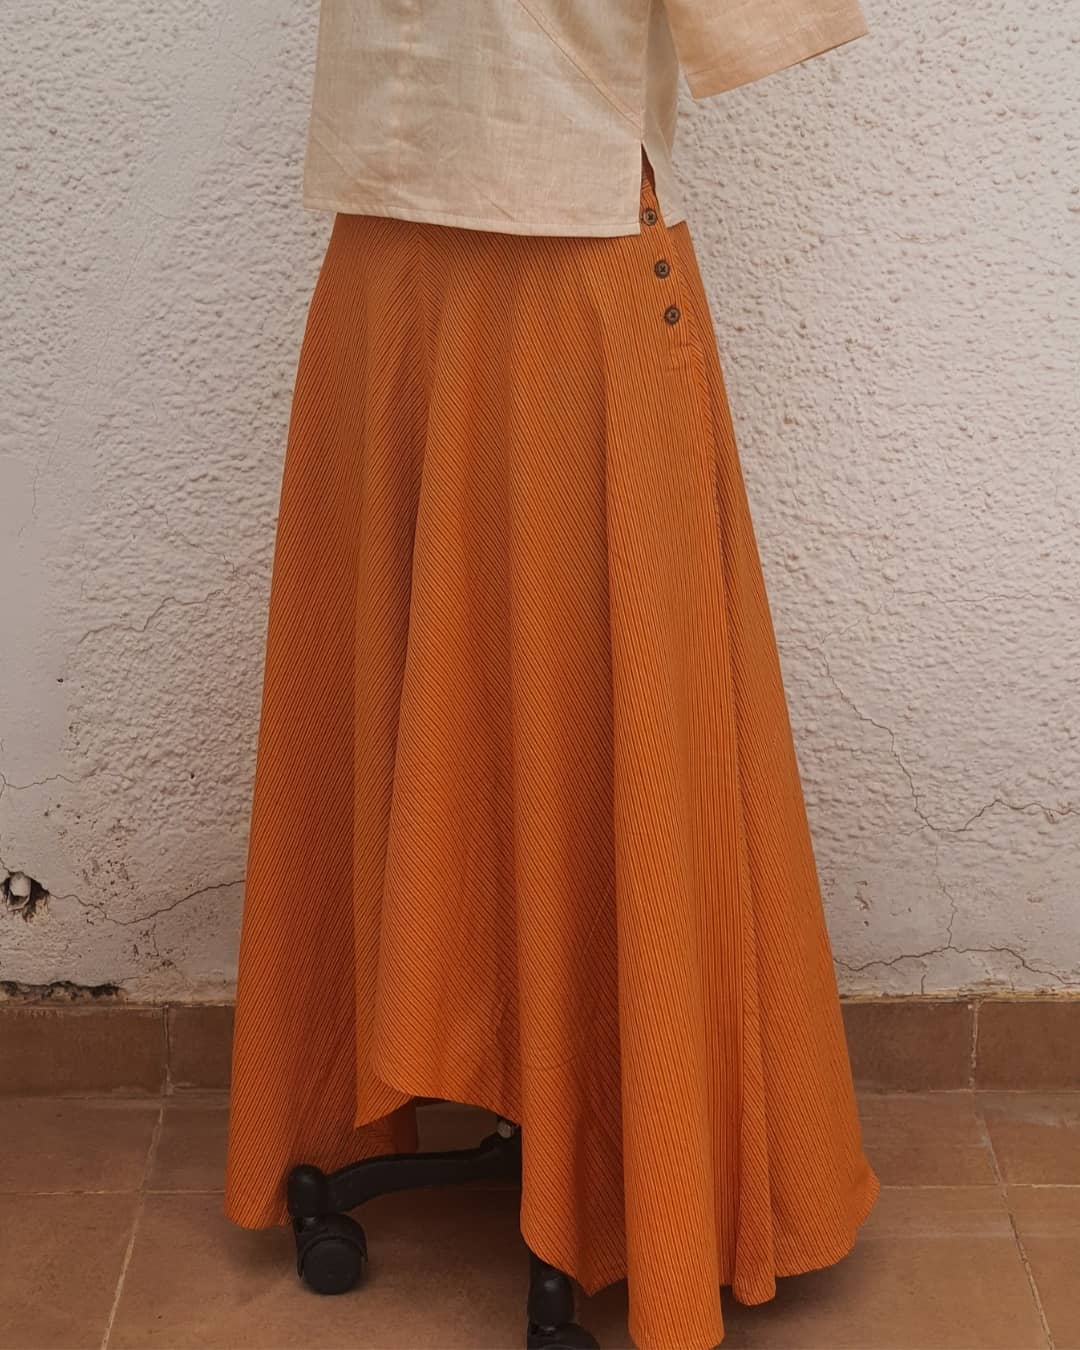 Picture of long asymmetrical skirt in orange stripes with a beige crop top